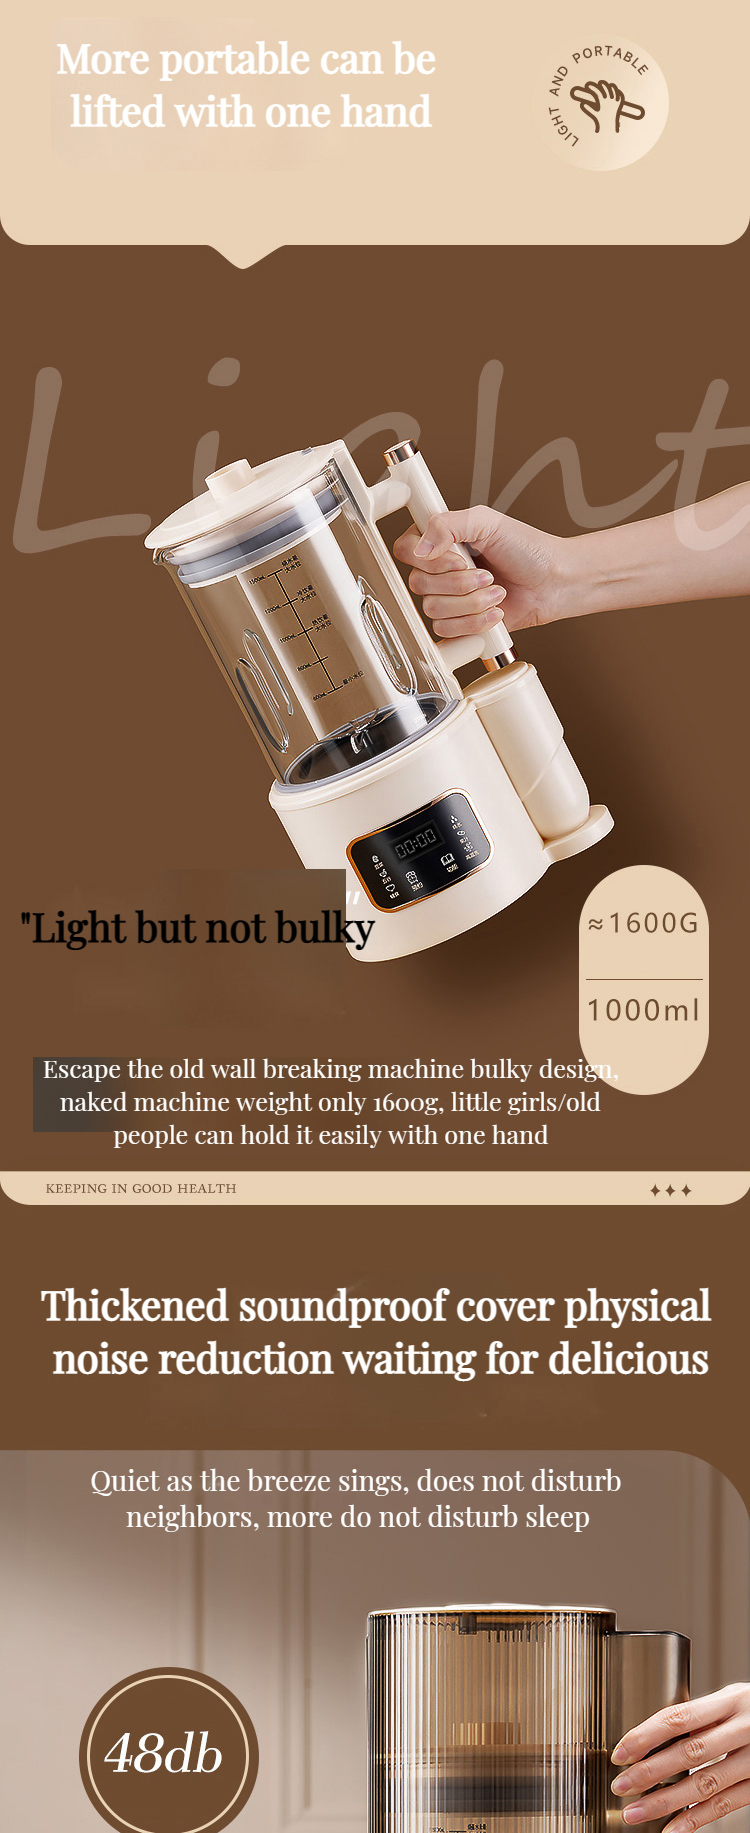 a bass wall breaker that can make a smoothie and a high boron glass cup for household heating automatic small soy milk machine food supplement machine silent soft sound multi functional blender with sound insulation cover details 3